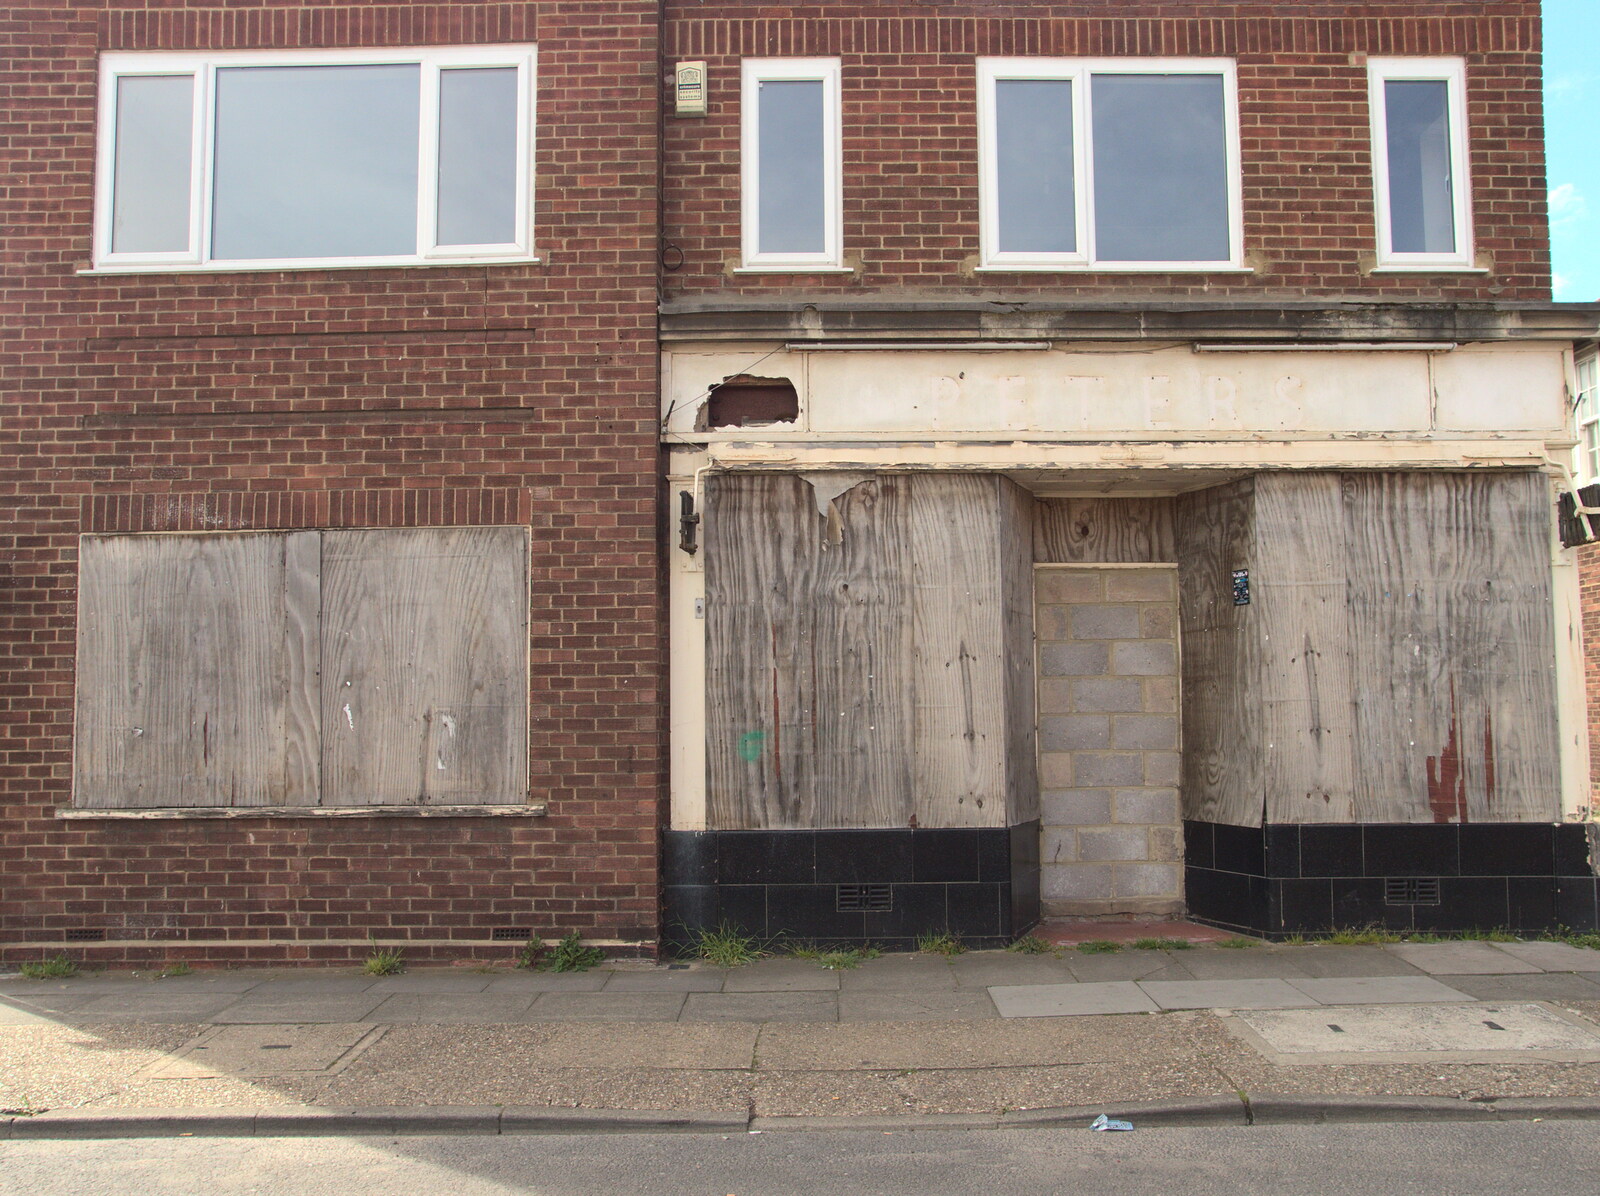 A derelict building on Grimwade Street from Diss Kebabs and Pizza Express, Ipswich, Suffolk - 7th May 2015